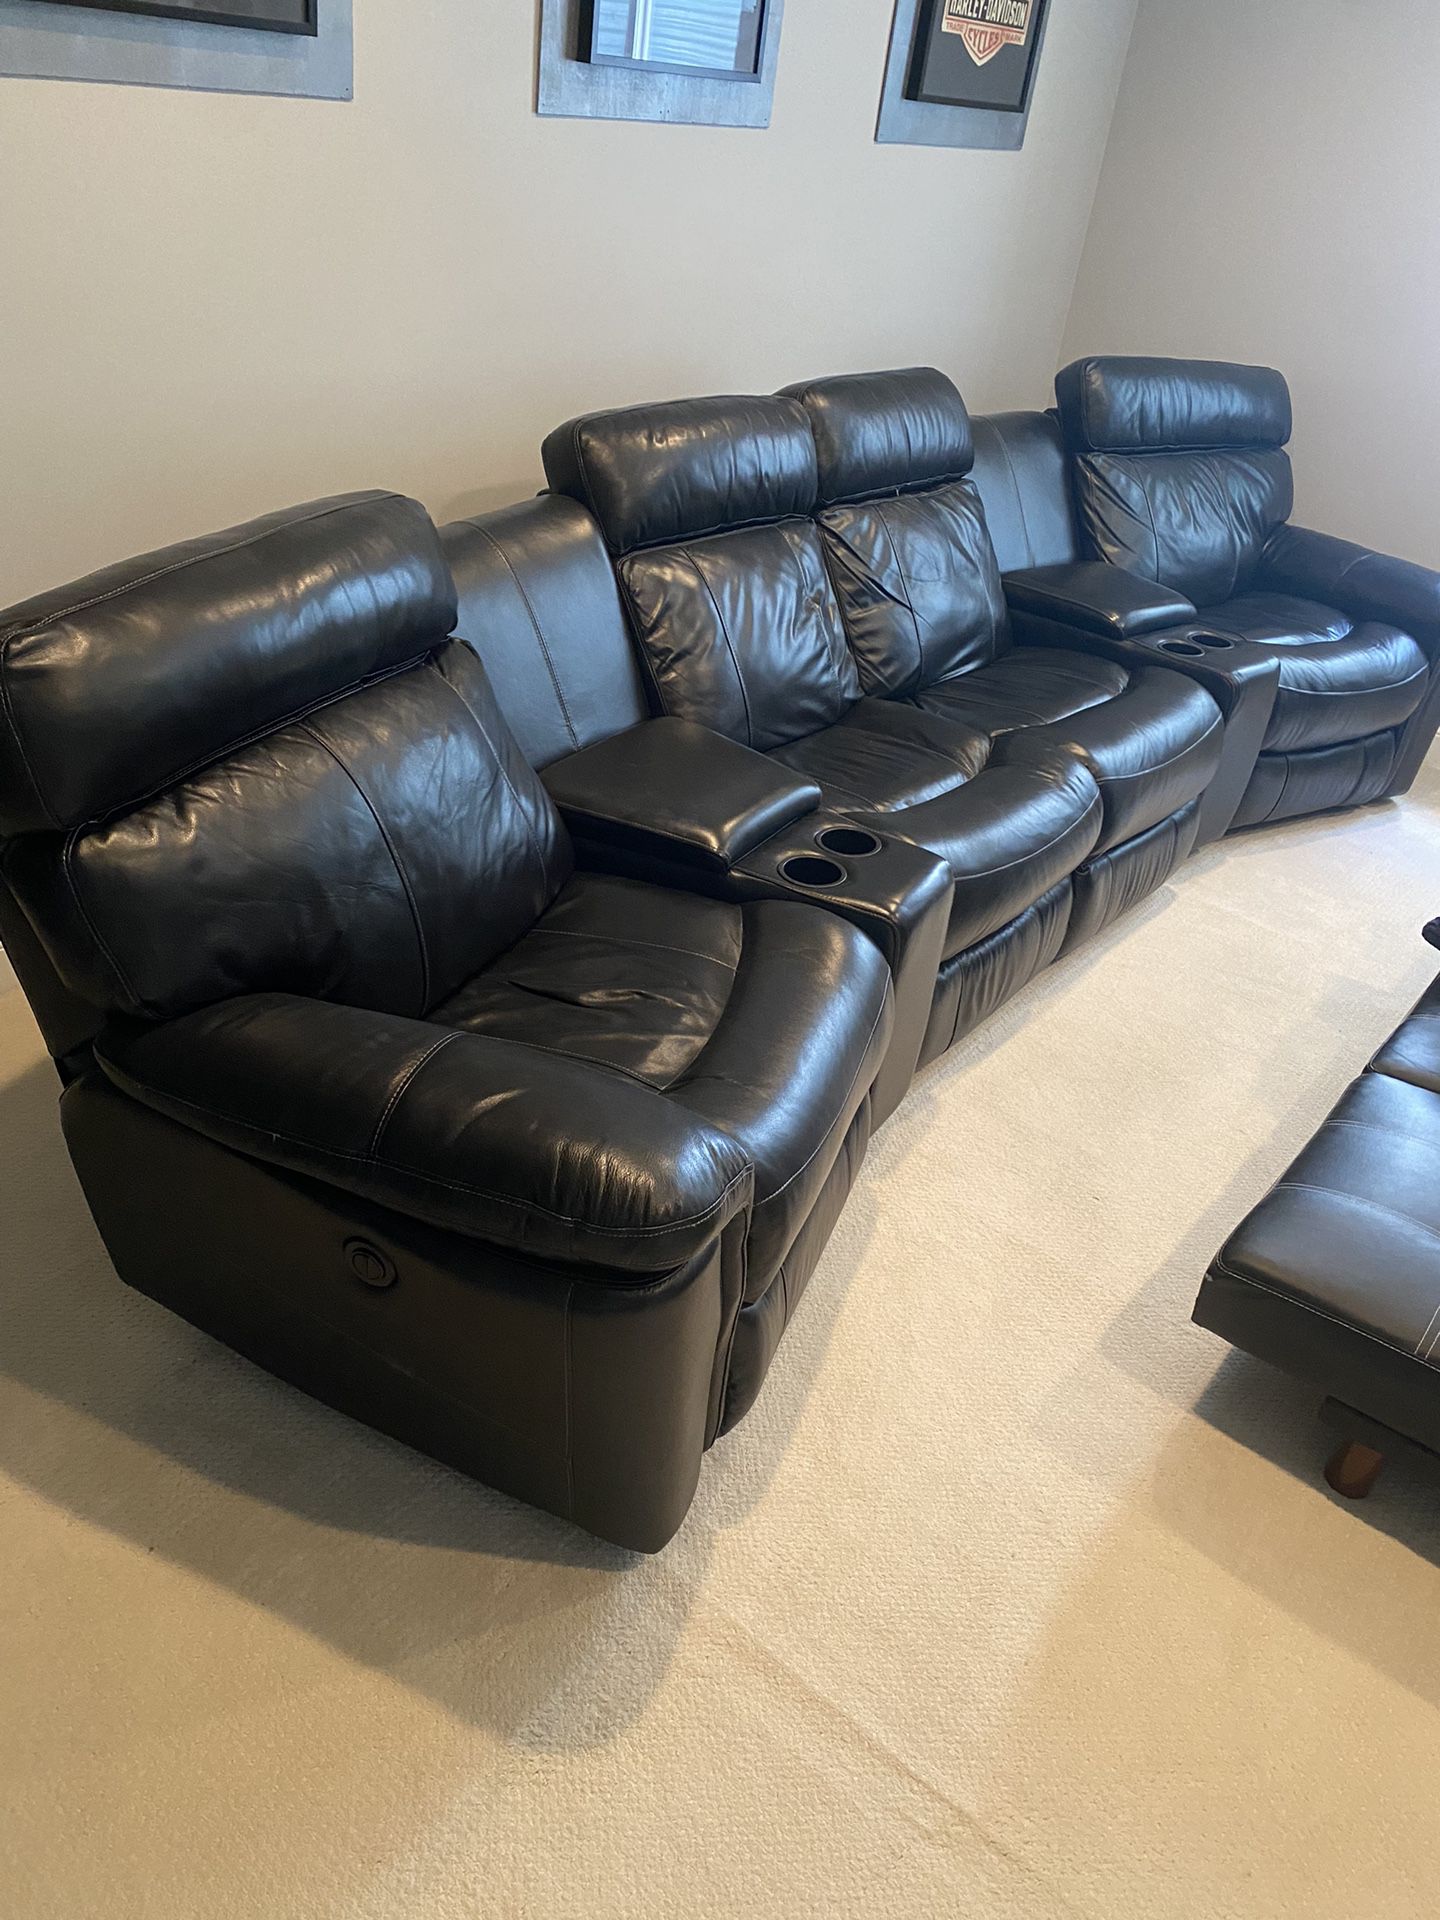 6 Piece Leather Sectional For Sale